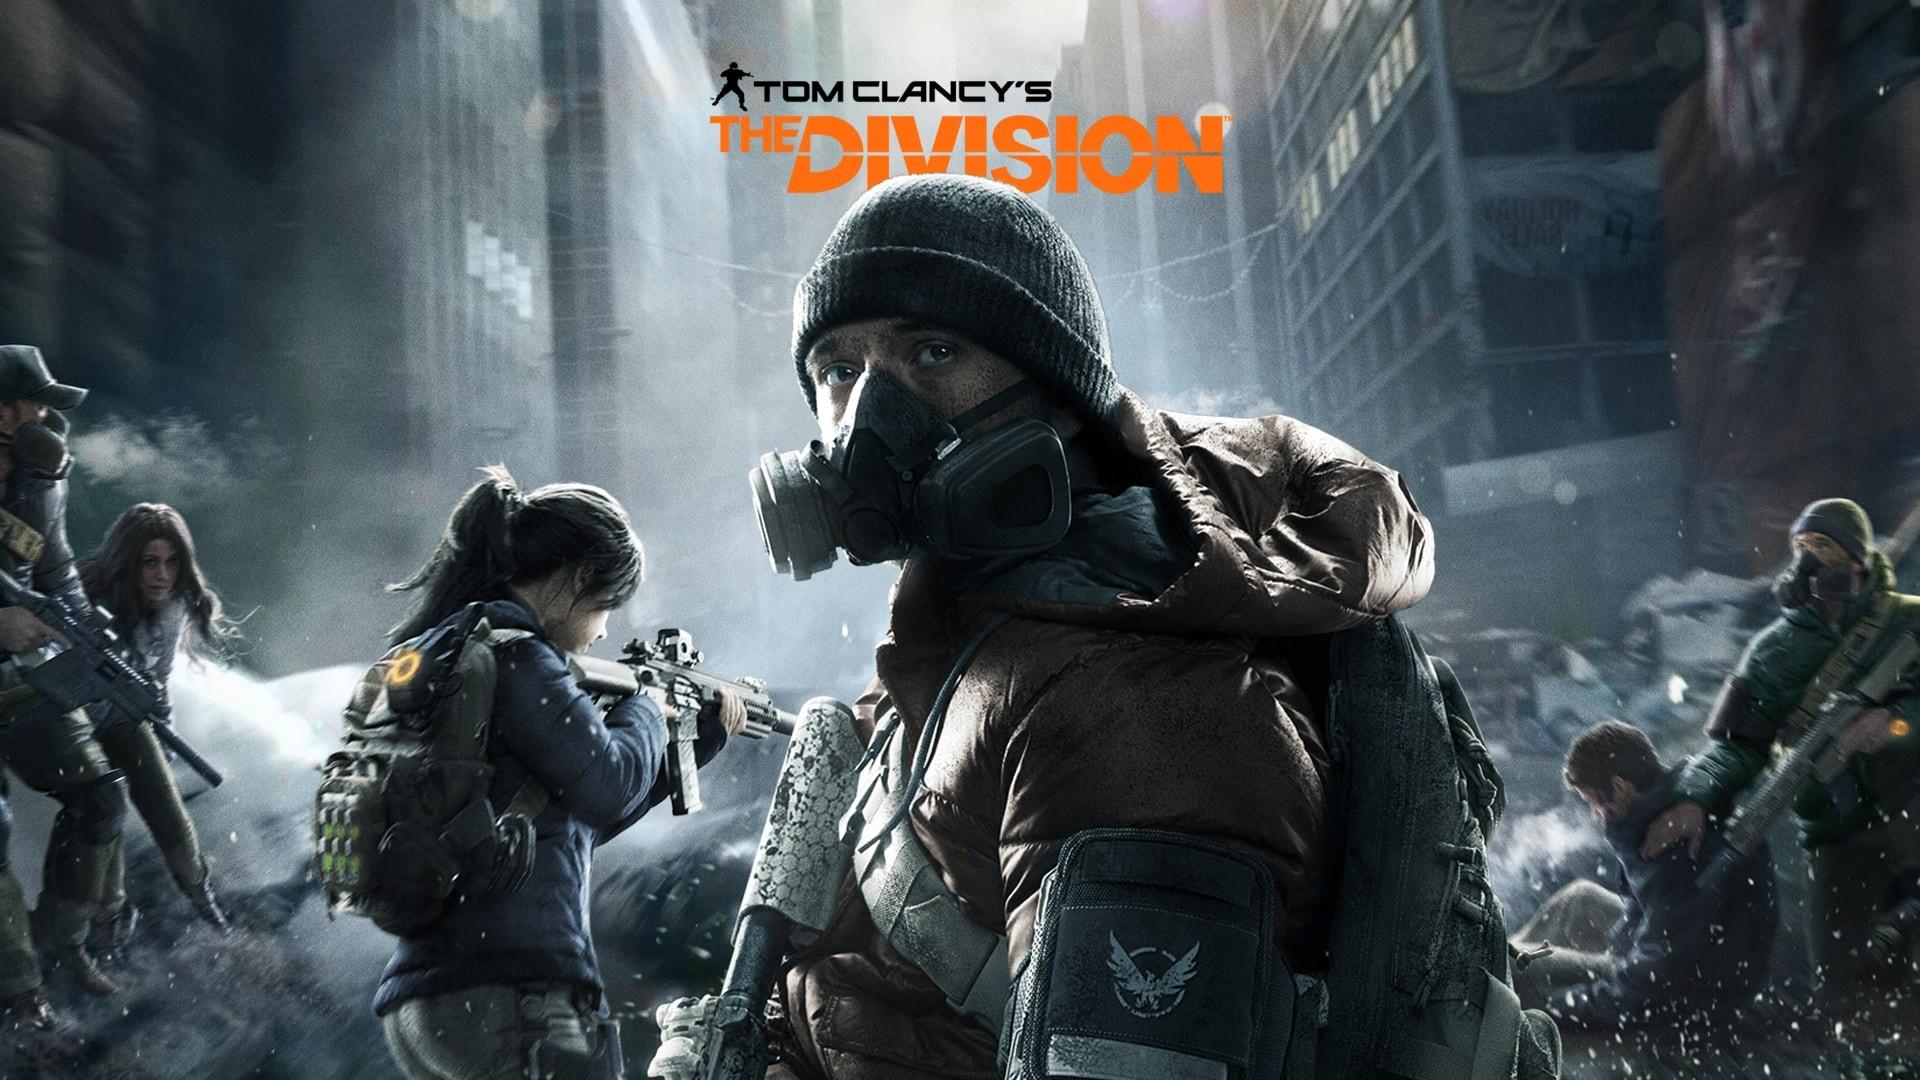 The Division Wallpaper 1920x1080